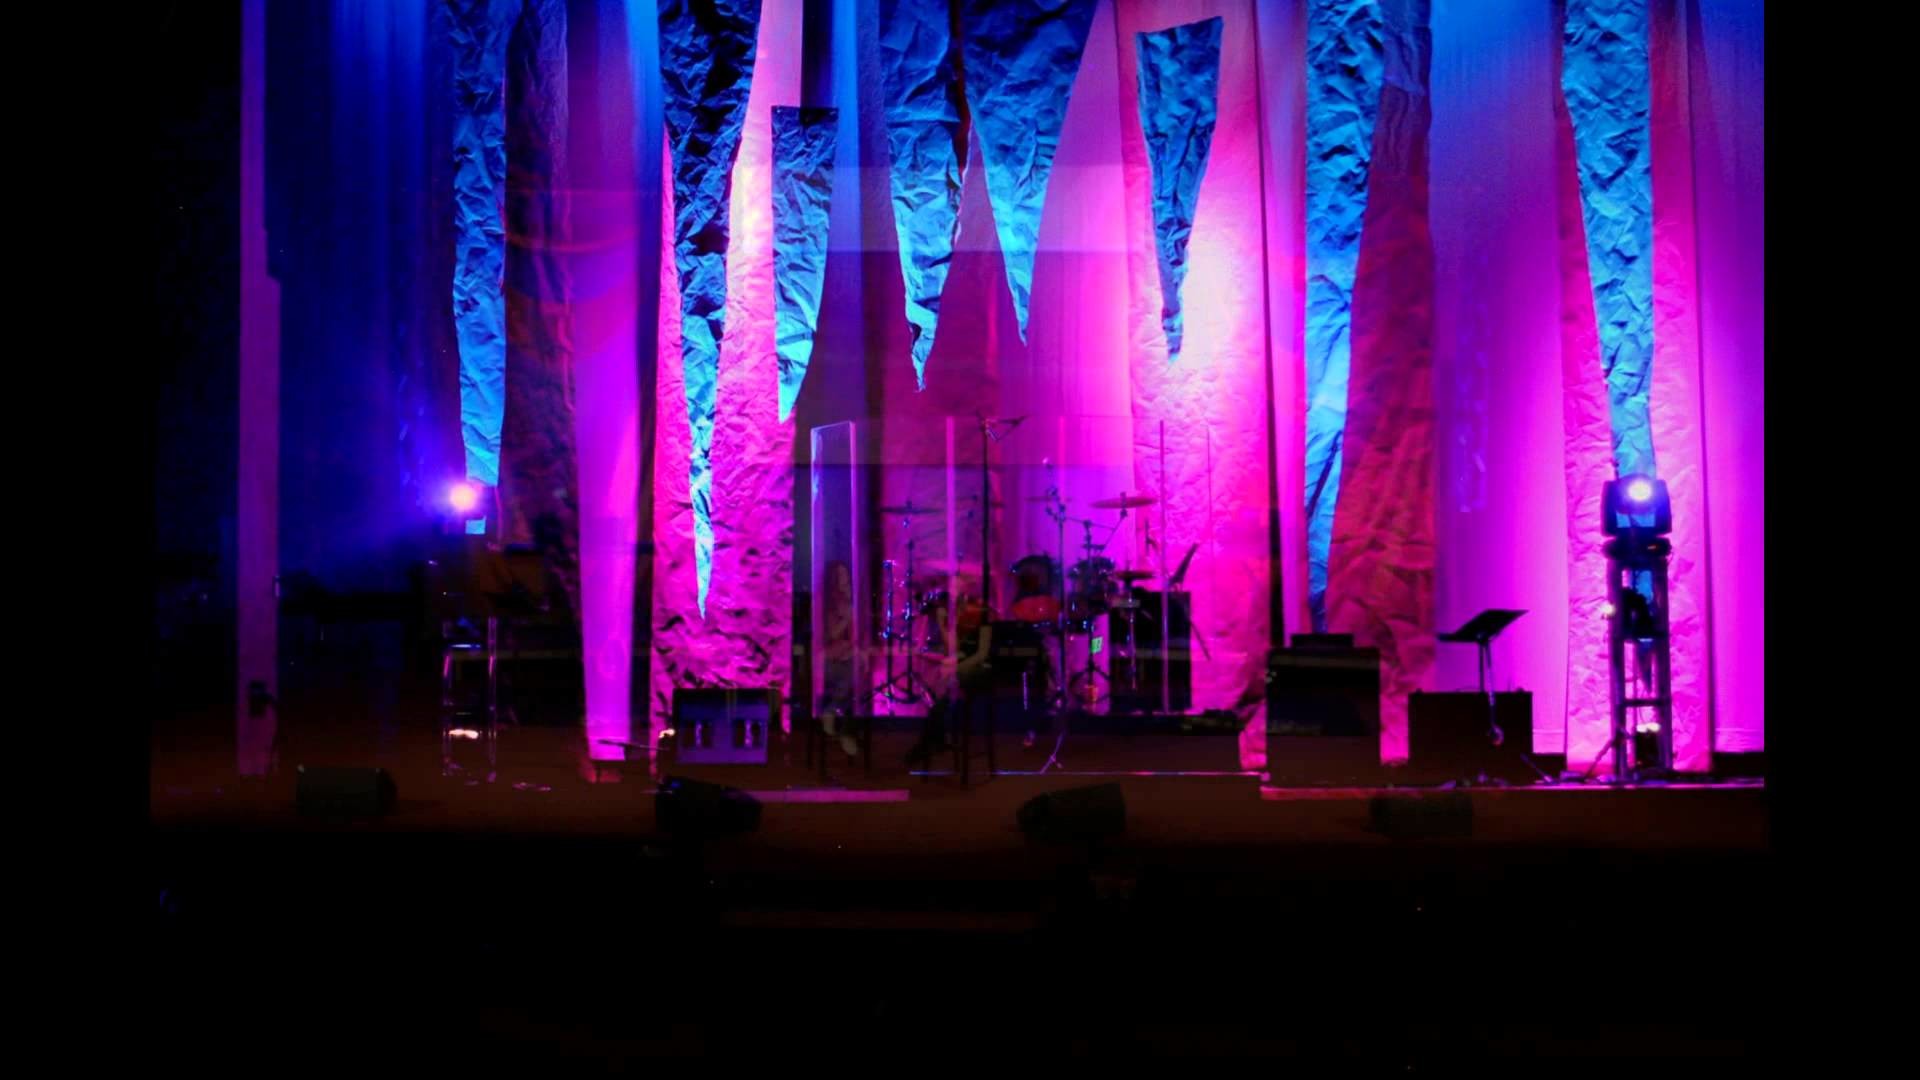 Cool Stage Lighting Design Ideas for Dance or Bands with Layout Examples  Amazon Advice